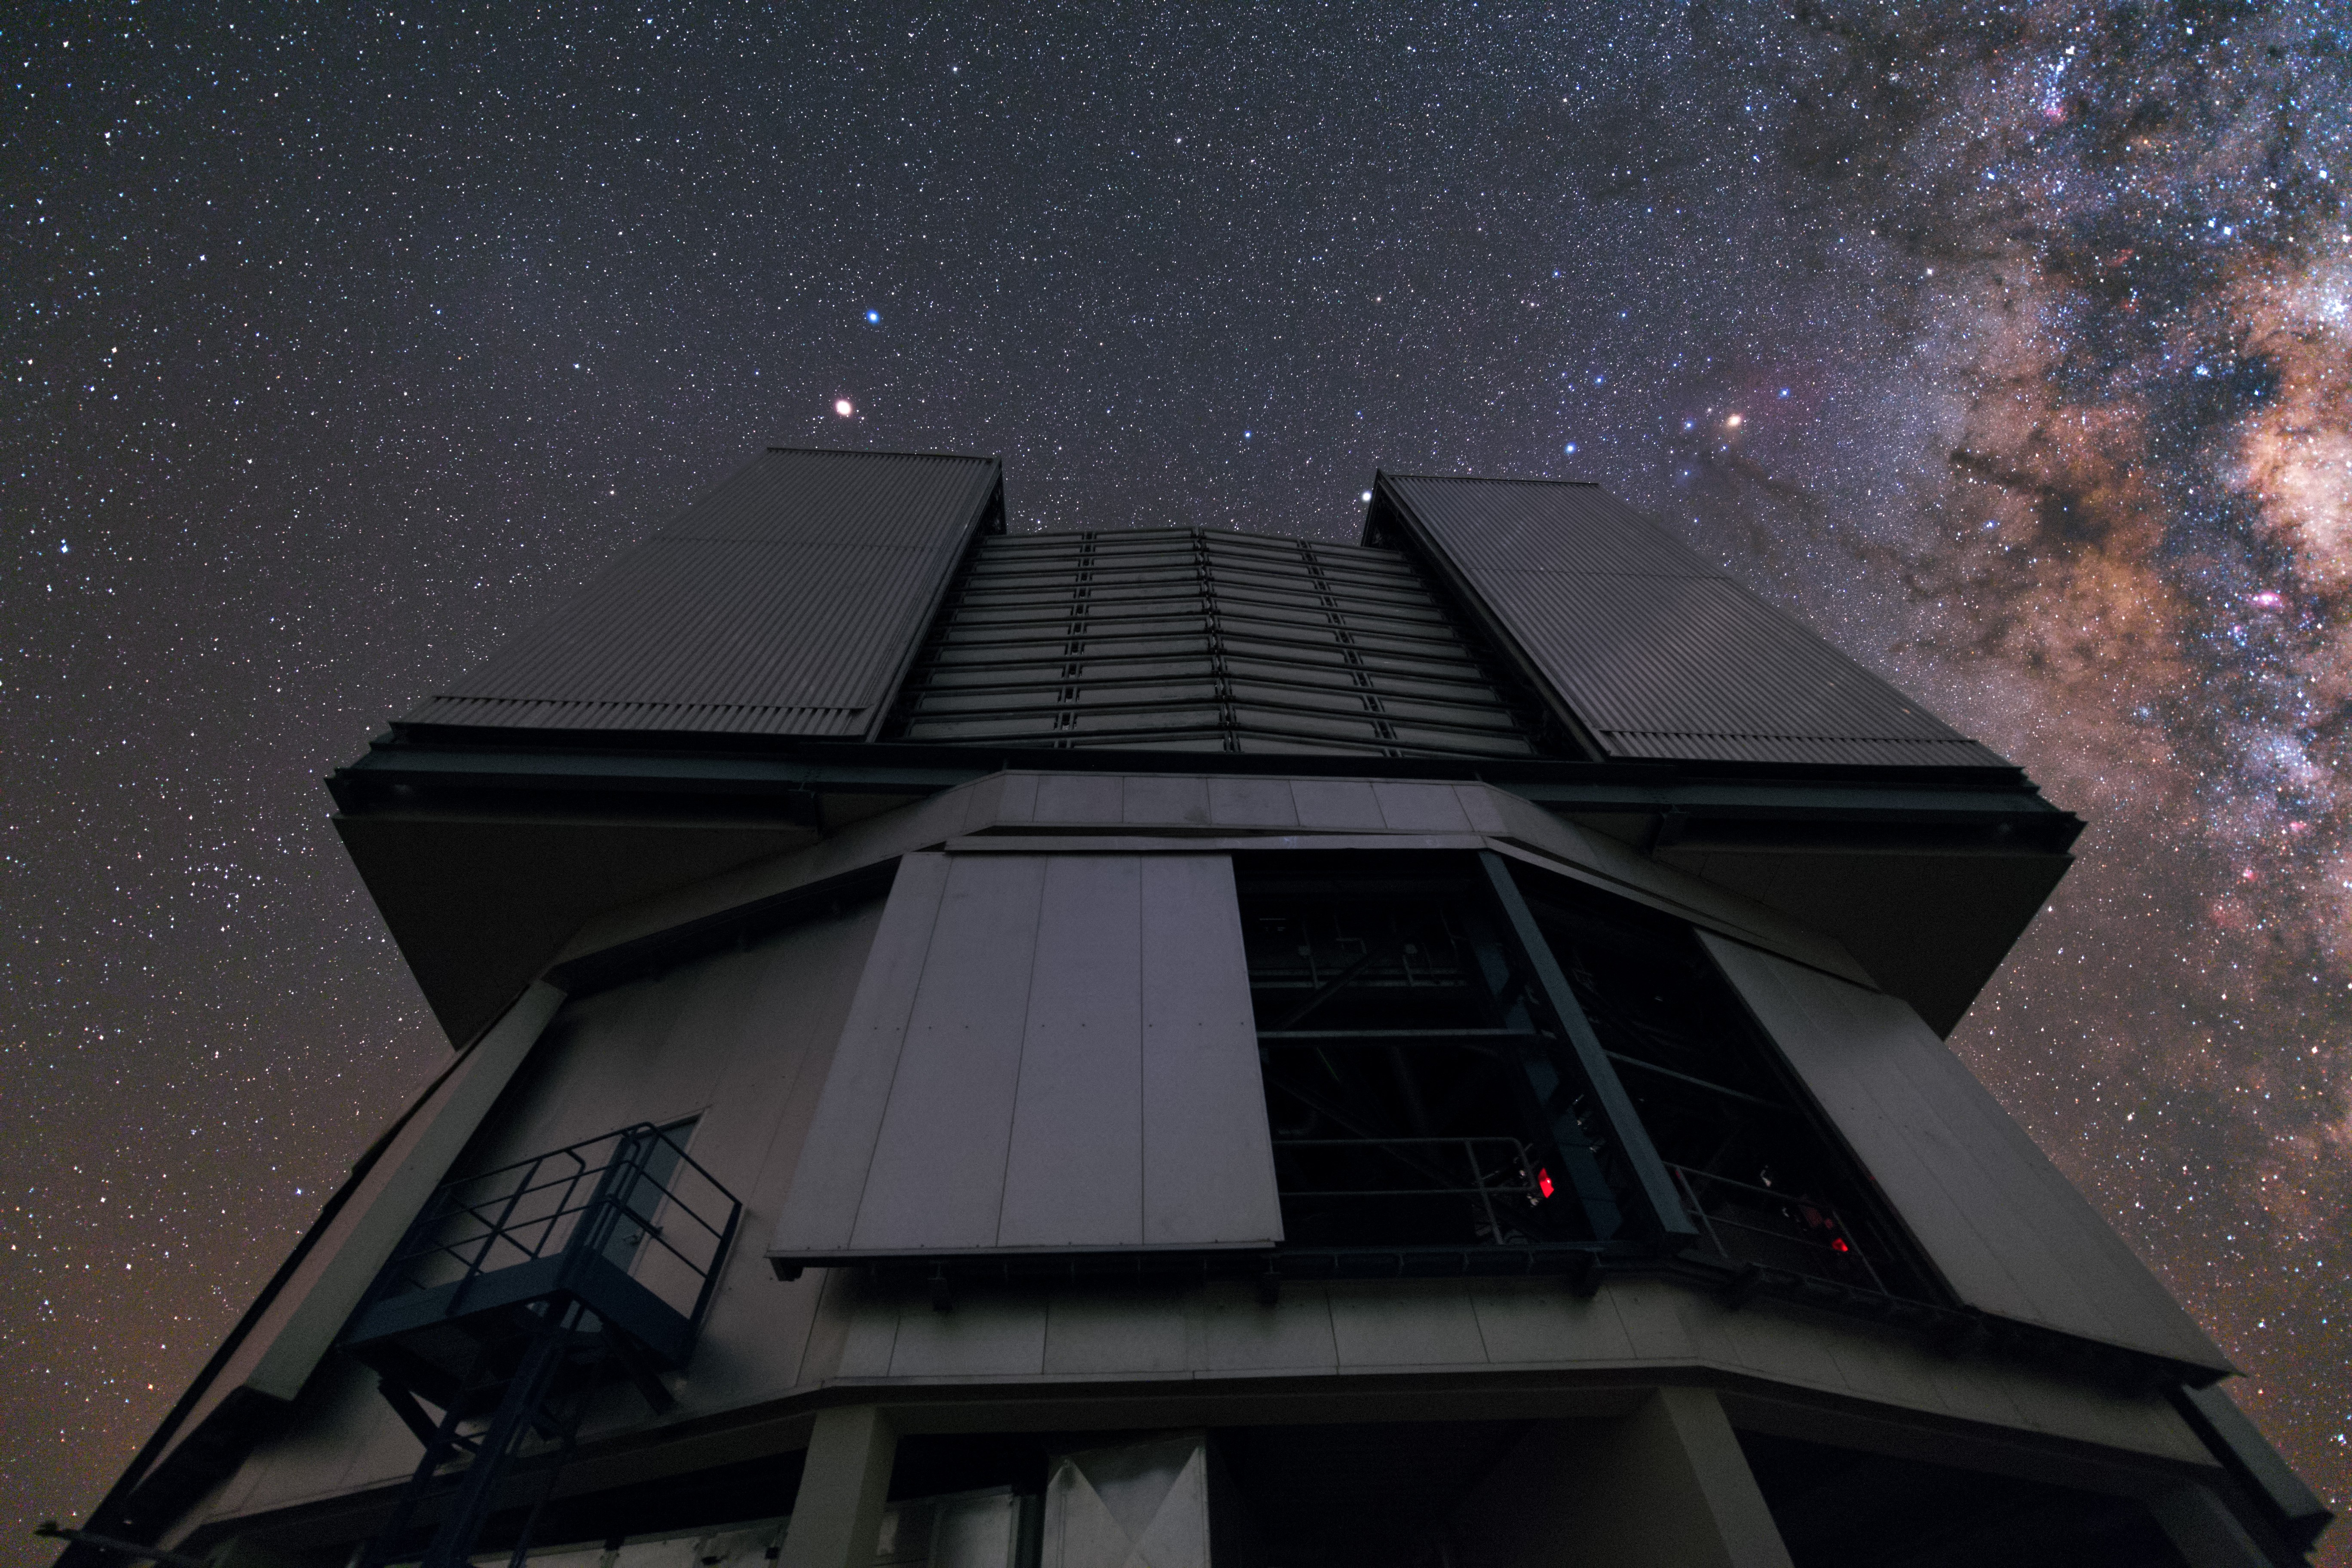 General 5472x3648 photography landscape nature Milky Way starry night long exposure observatory telescope astronomy technology building architecture Chile